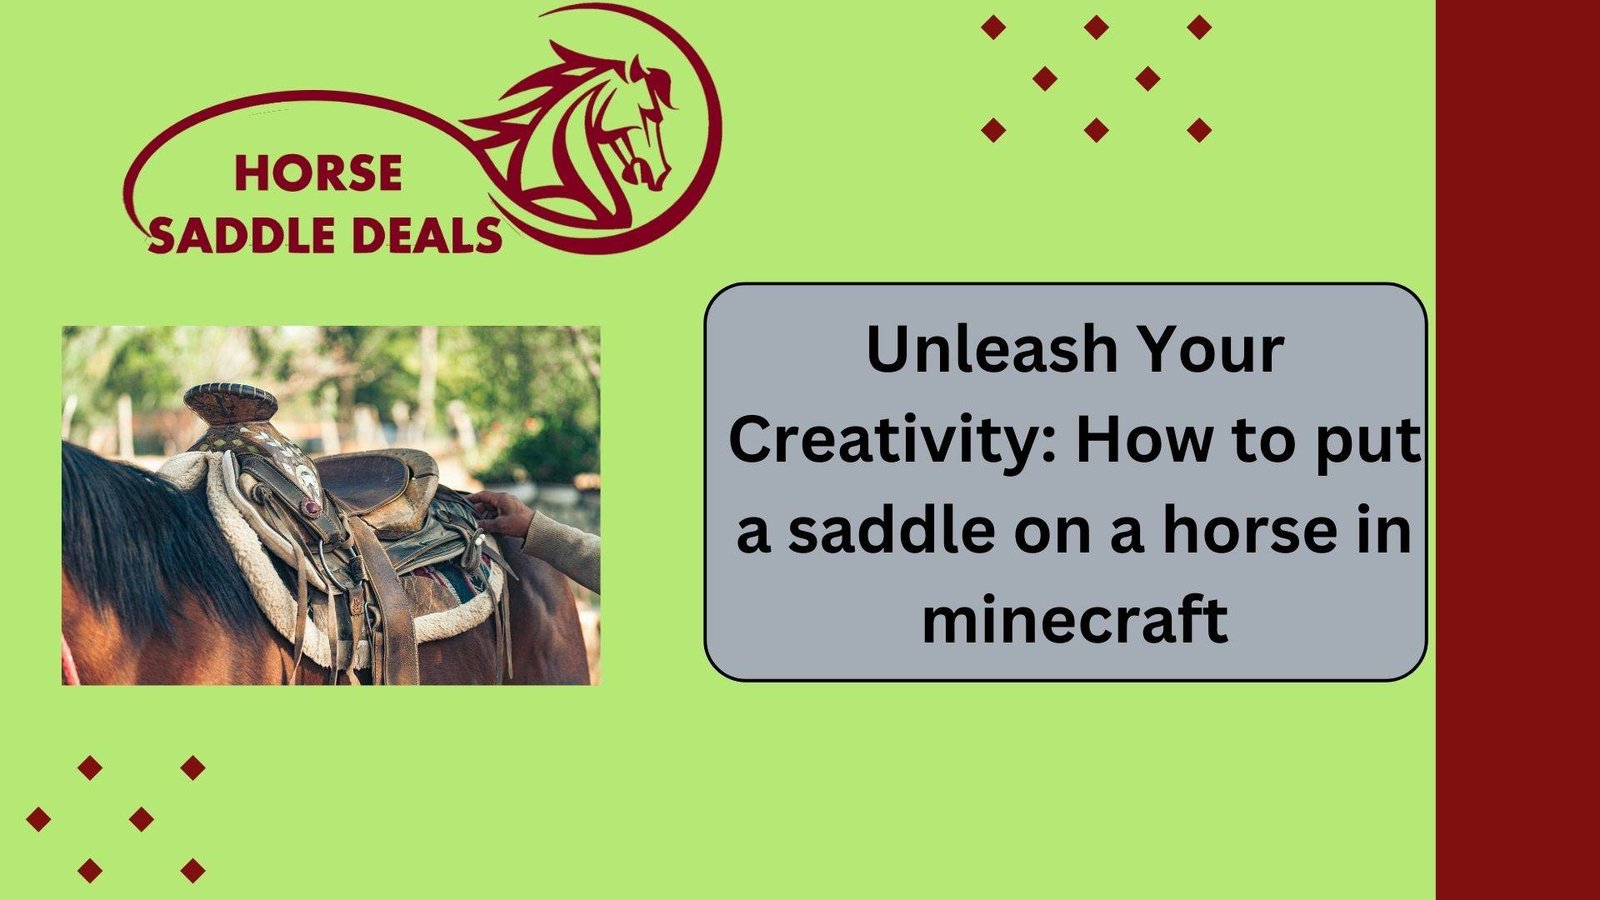 Unleash Your Creativity: How to put a saddle on a horse in minecraft